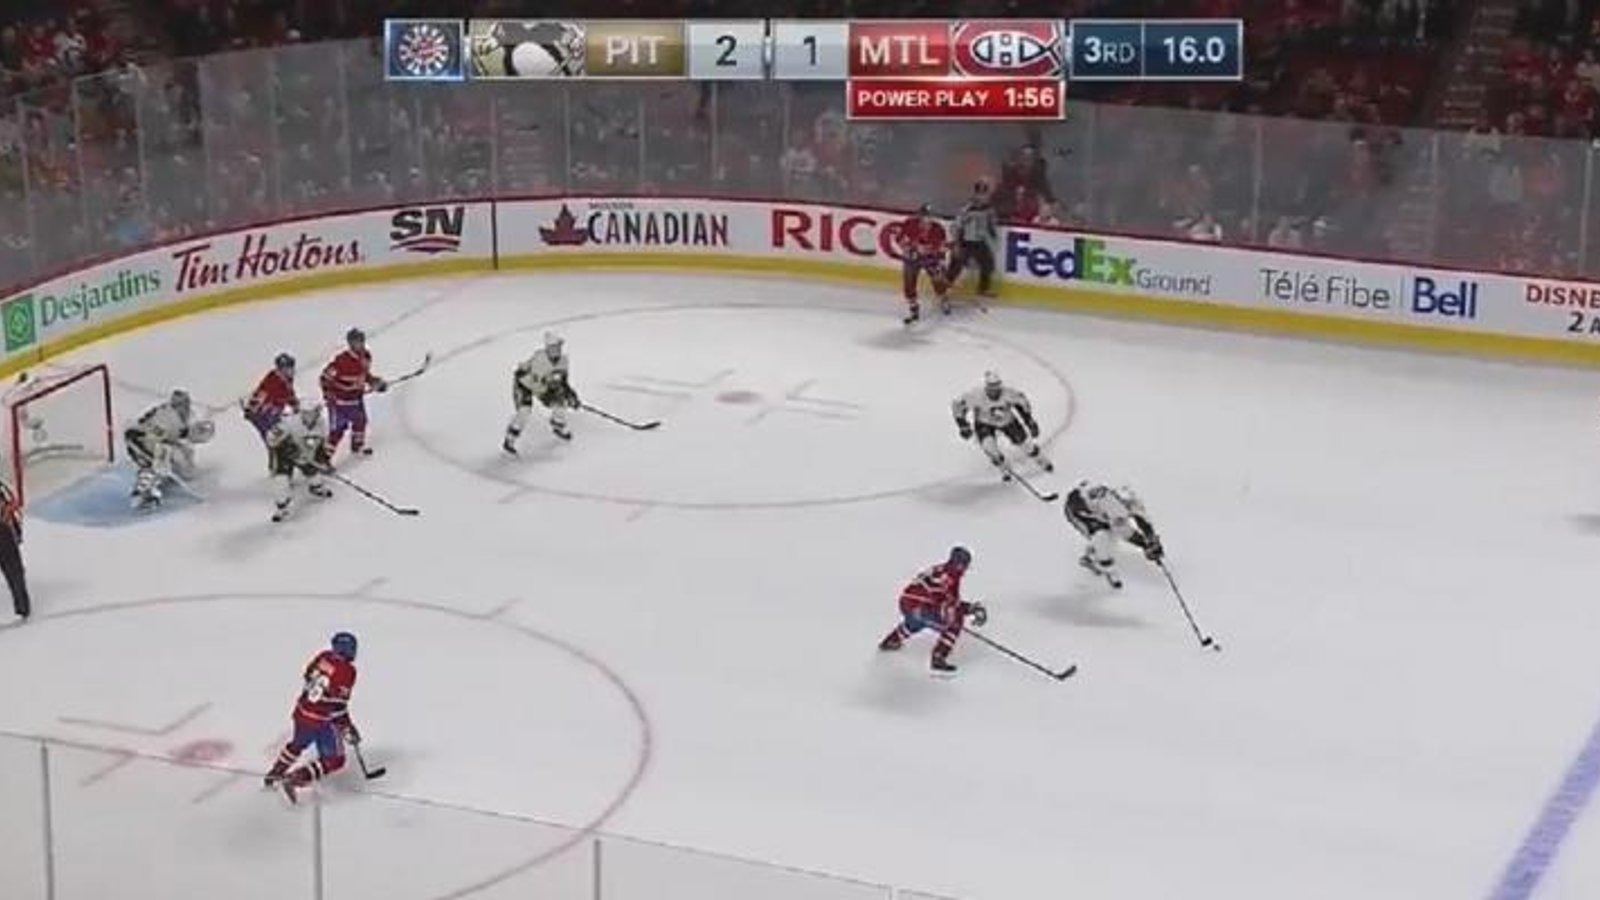 Great defensive awareness finishes off the Canadiens!